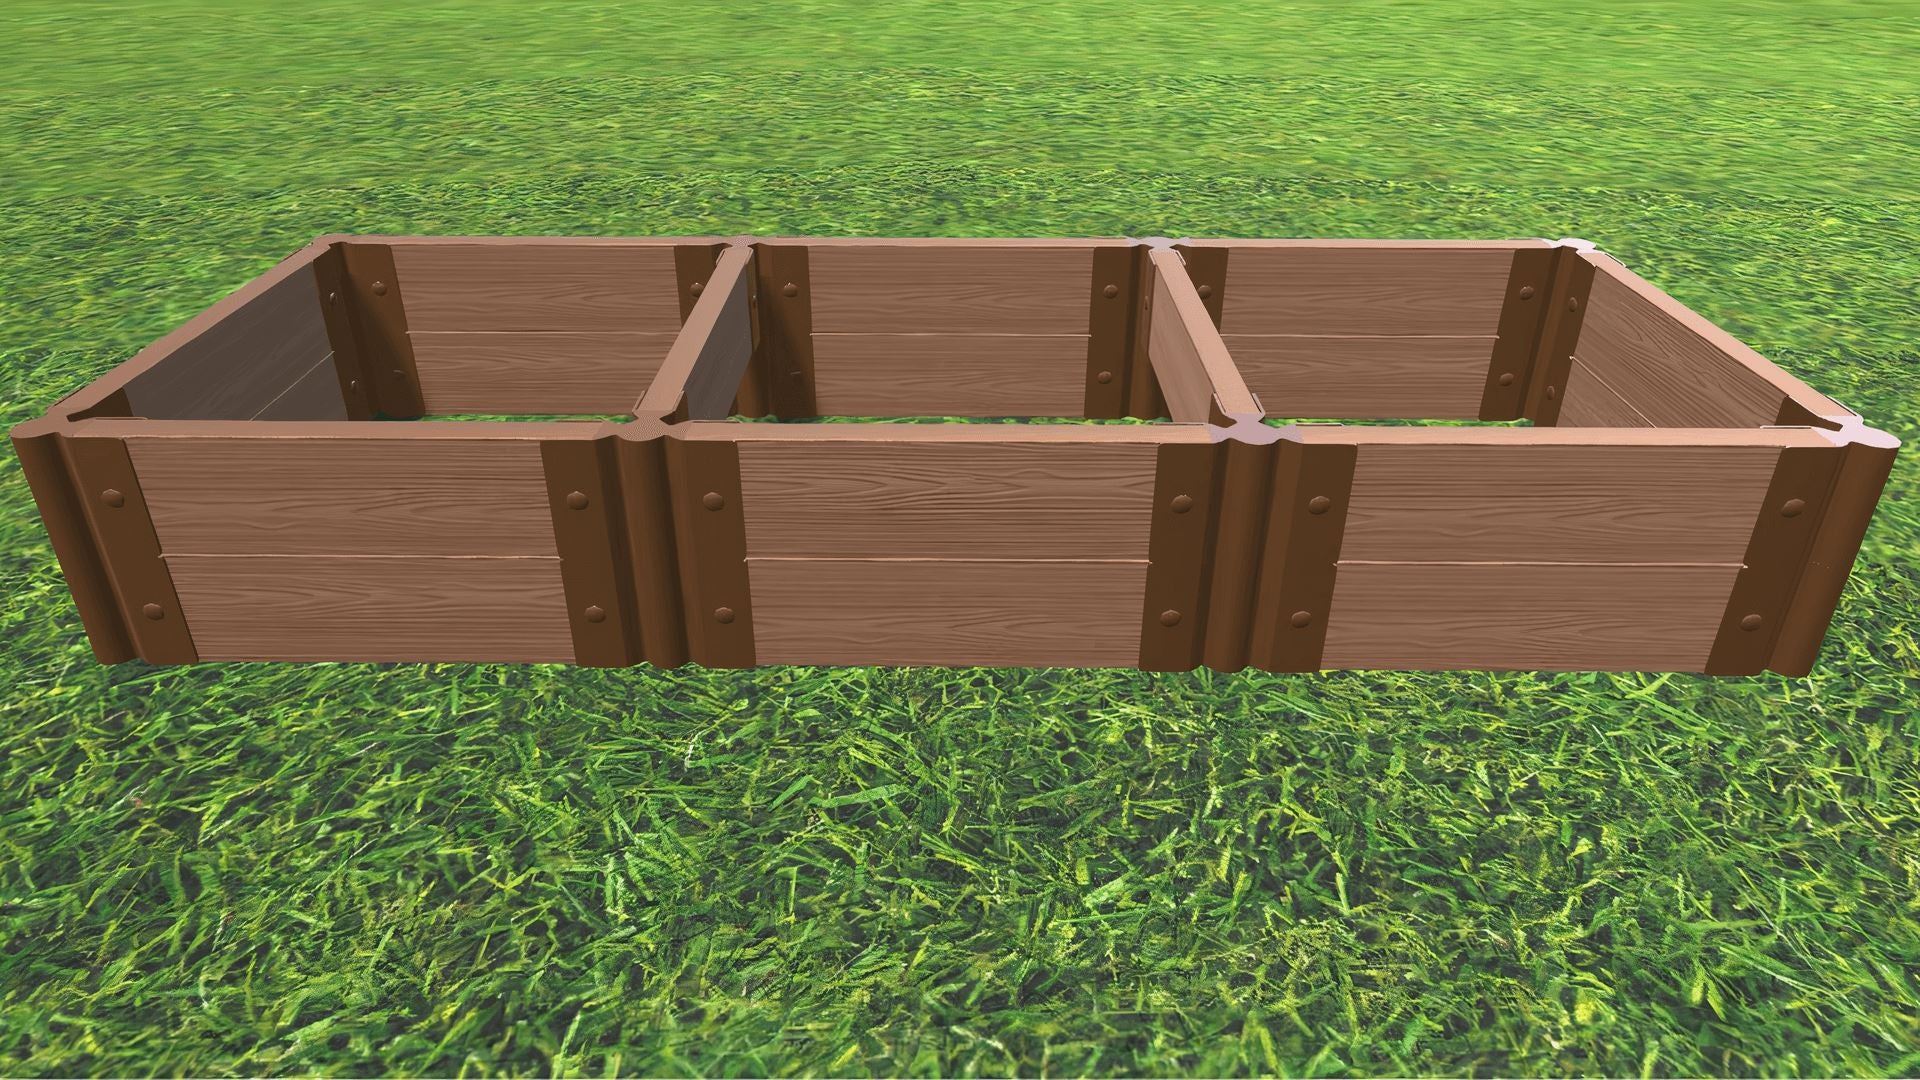 Tool-Free 2' x 6' Raised Garden Bed Raised Bed Planters Frame It All Classic Sienna 2" 2 = 11"